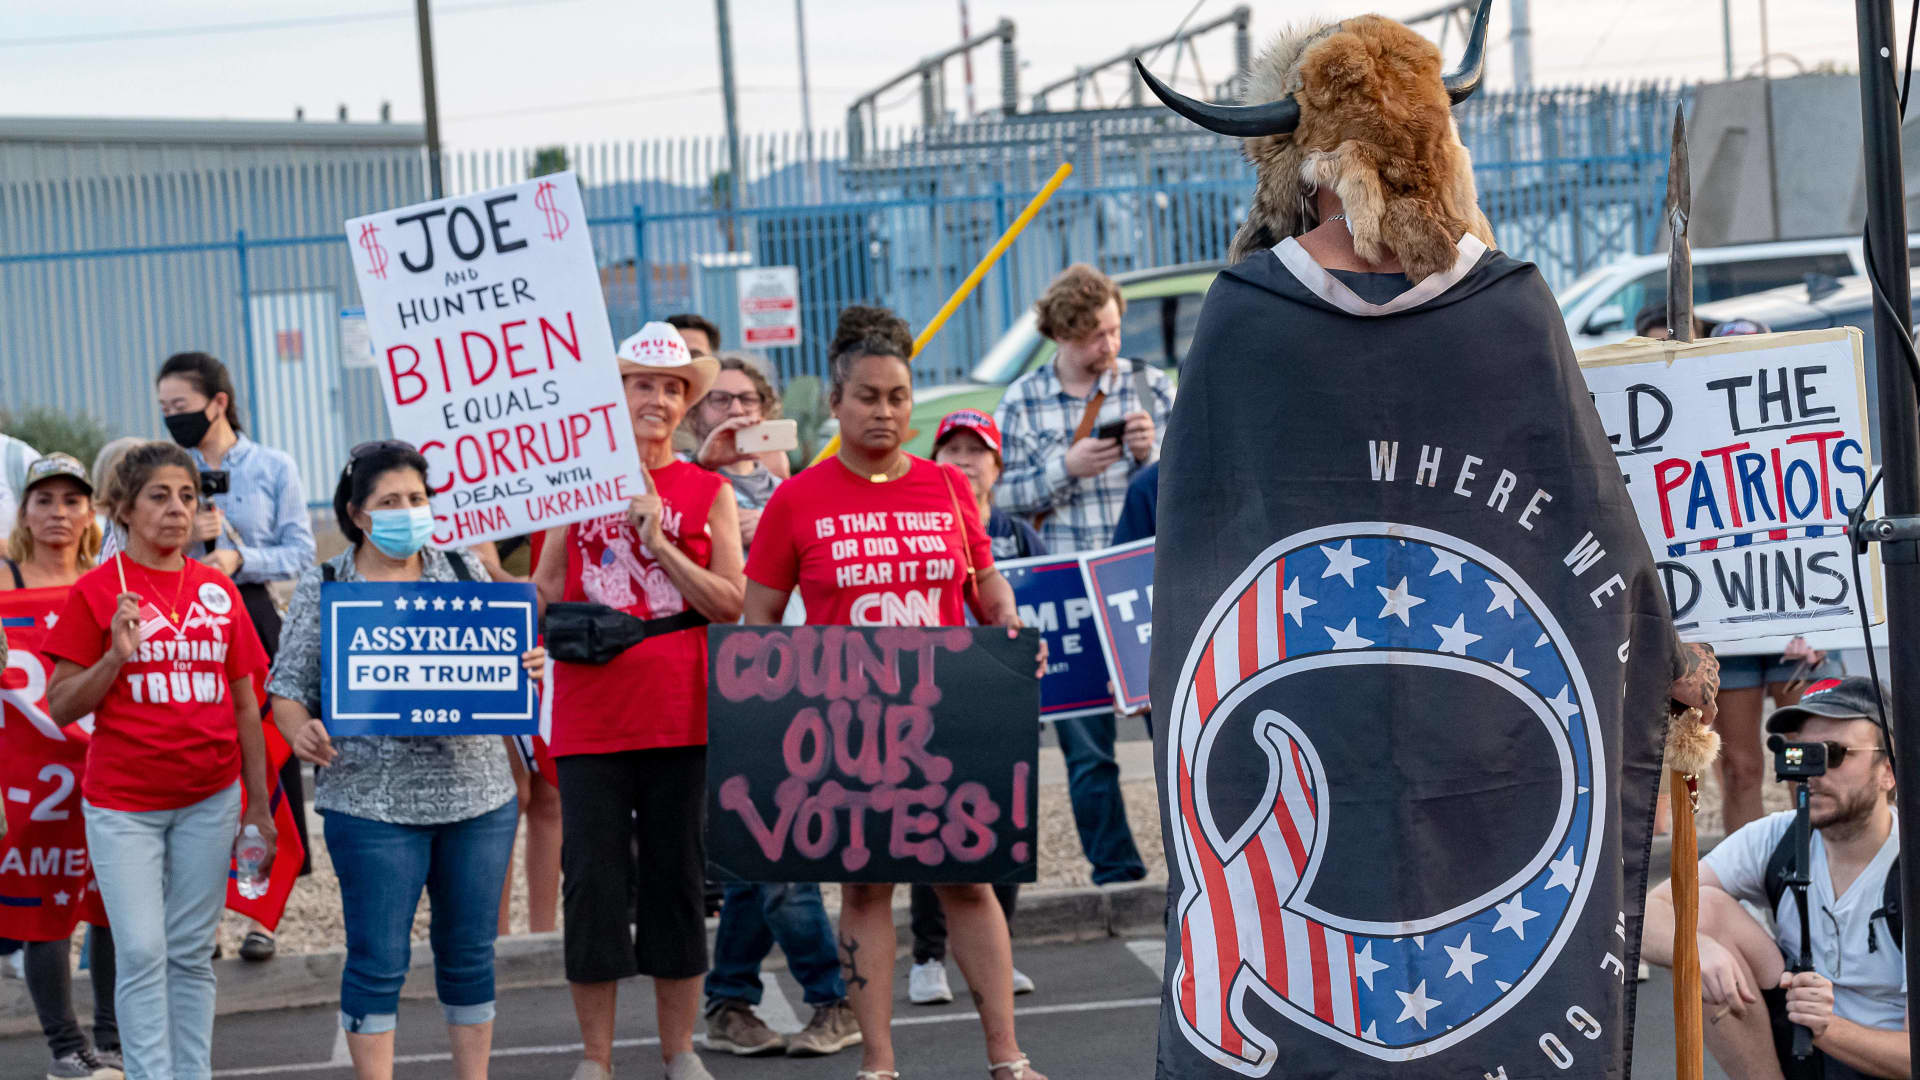 Jake A, 33, aka Yellowstone Wolf, from Phoenix, wrapped in a QAnon flag, addresses supporters of US President Donald Trump as they protest outside the Maricopa County Election Department as counting continues after the US presidential election in Phoenix, Arizona, on November 5, 2020.